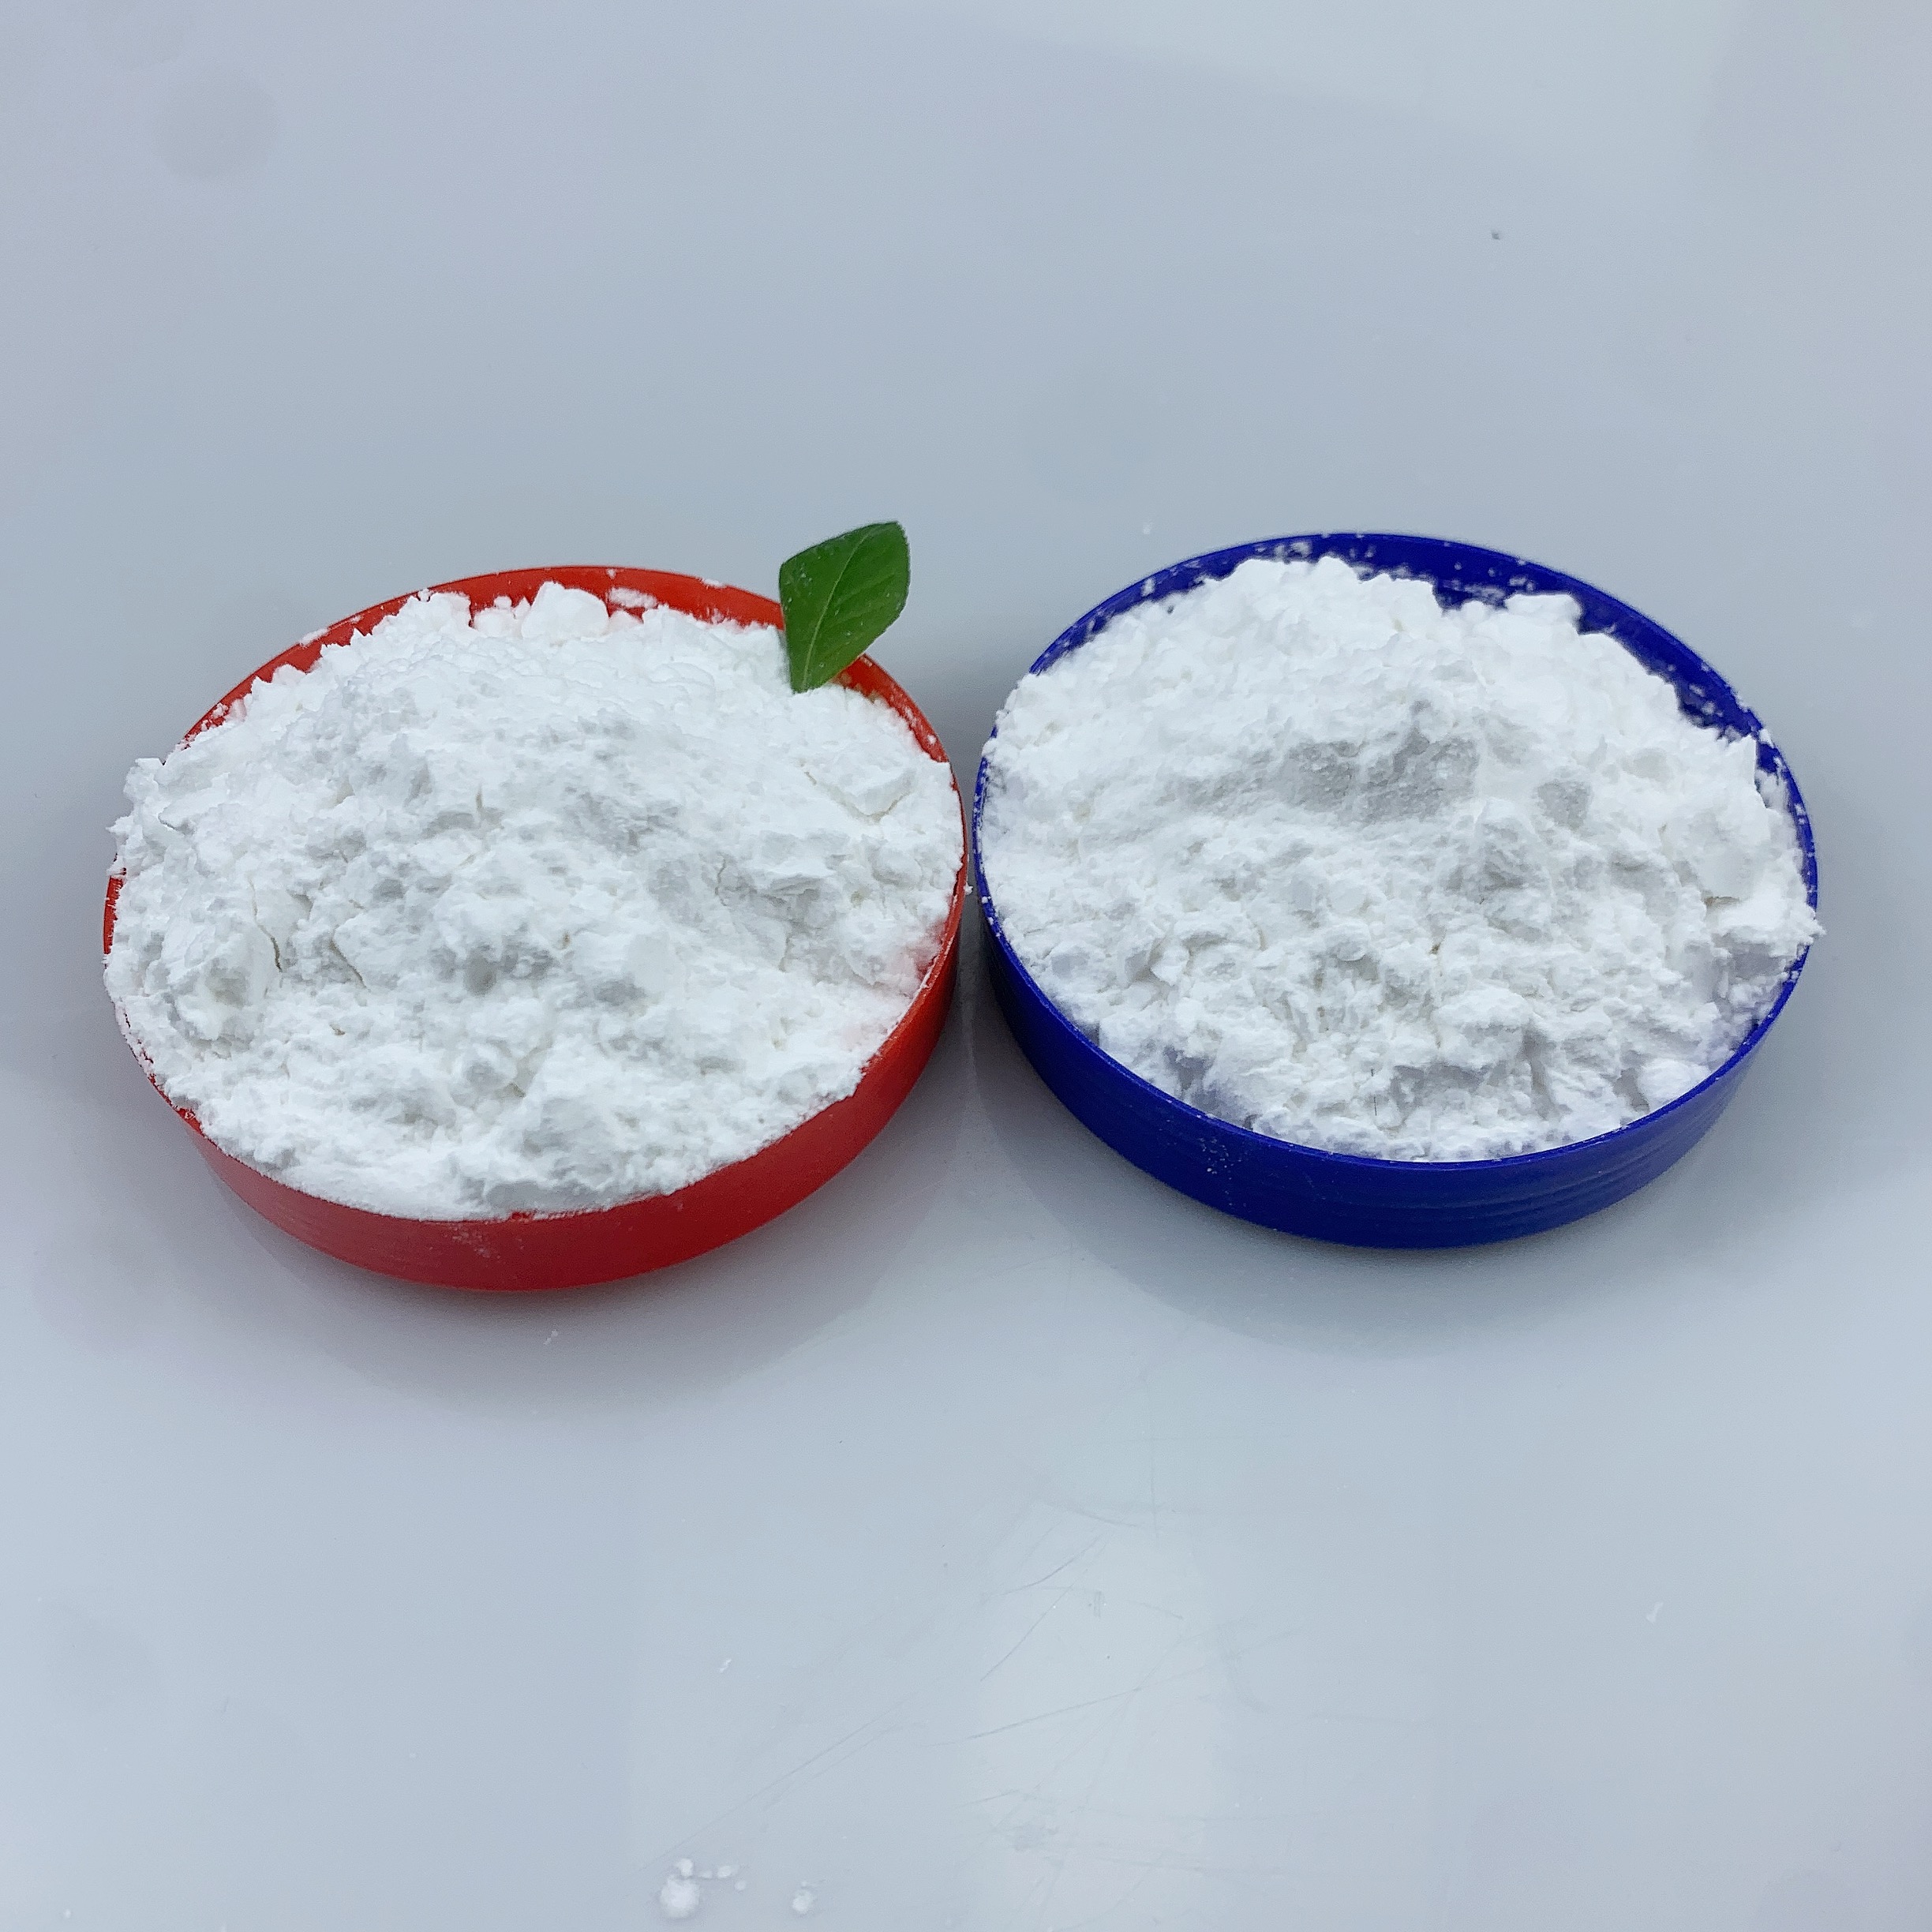 High Quality 99% High Purity Original Powder Epitalon CAS 307297-39-8 with Safe Delivery in Stock overseas warehouse Free samples